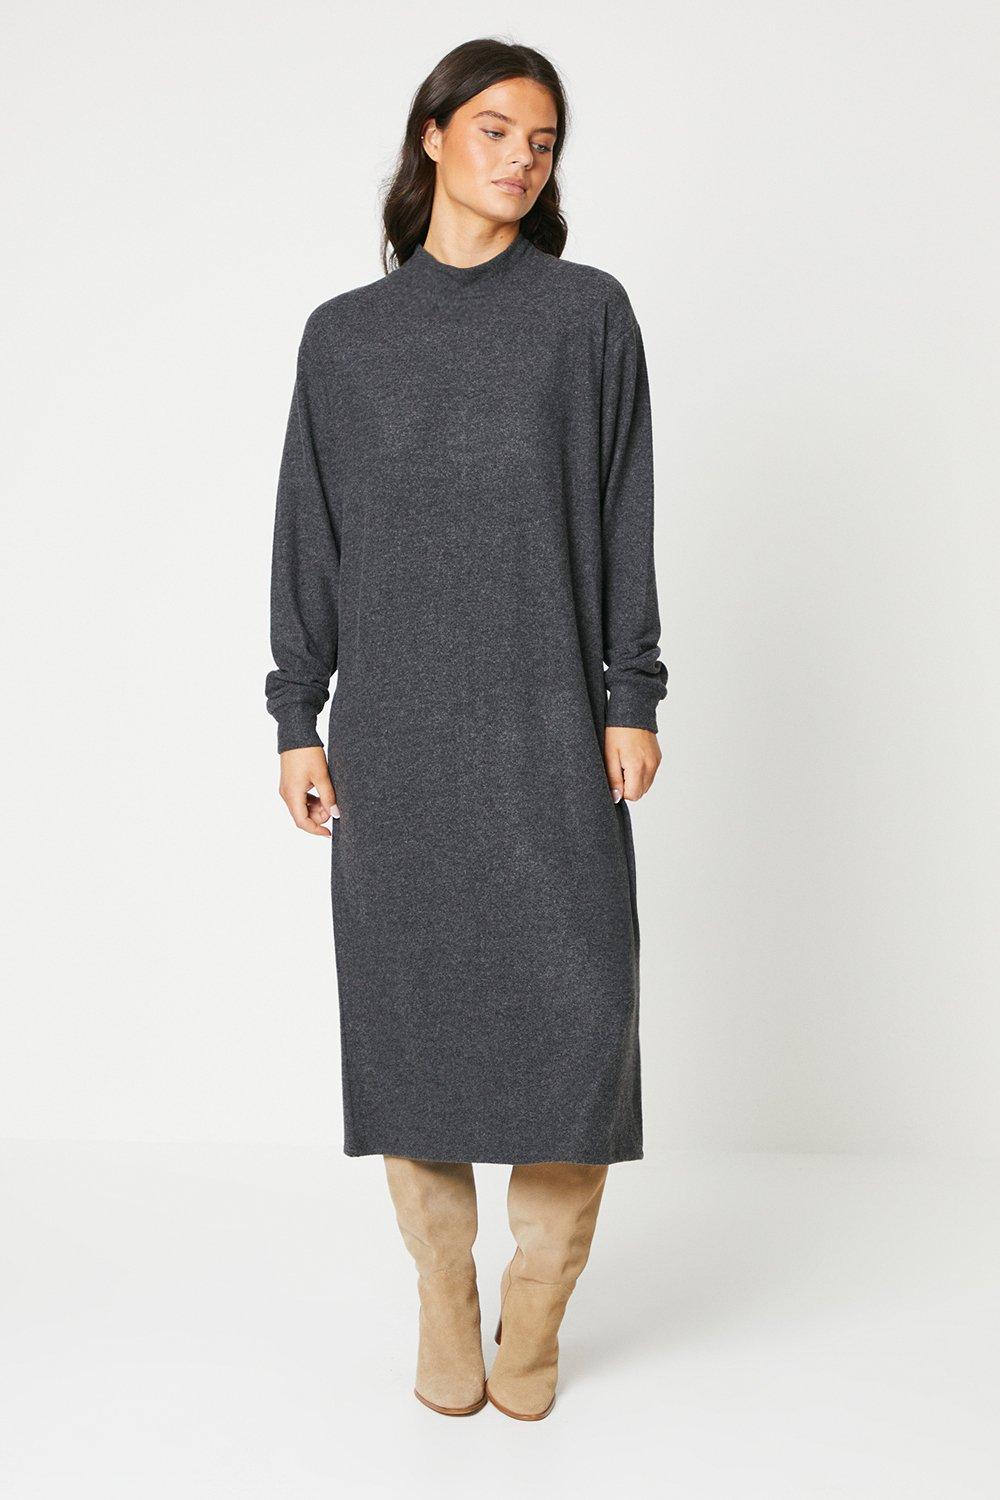 Women’s Soft Touch Roll Neck Midi Dress - charcoal - 10